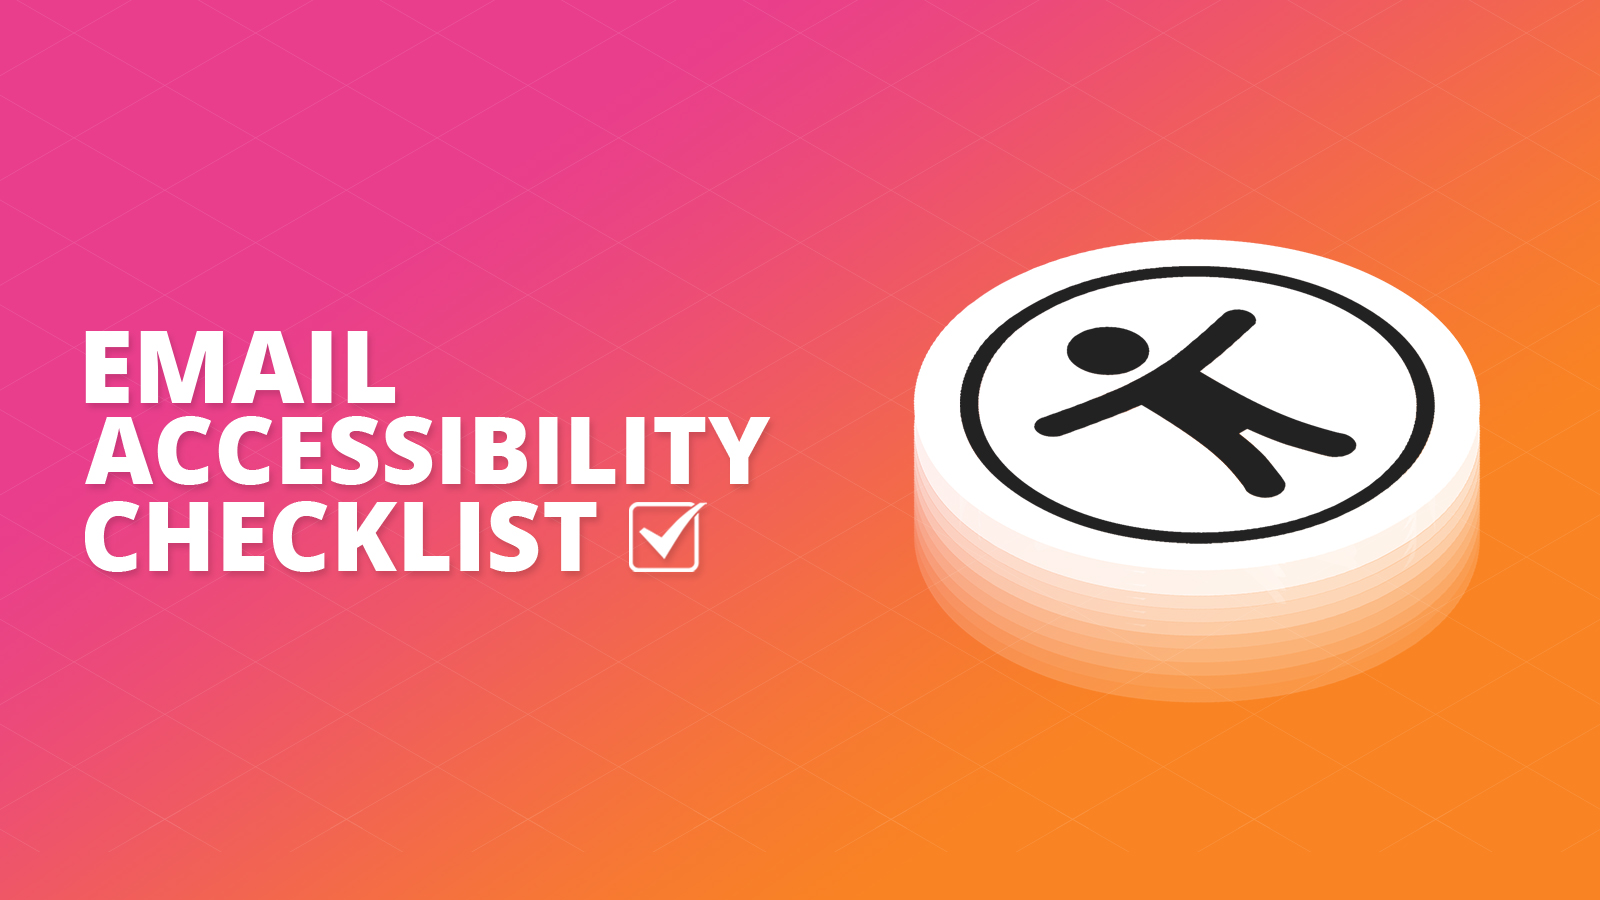 Email accessibility checklist